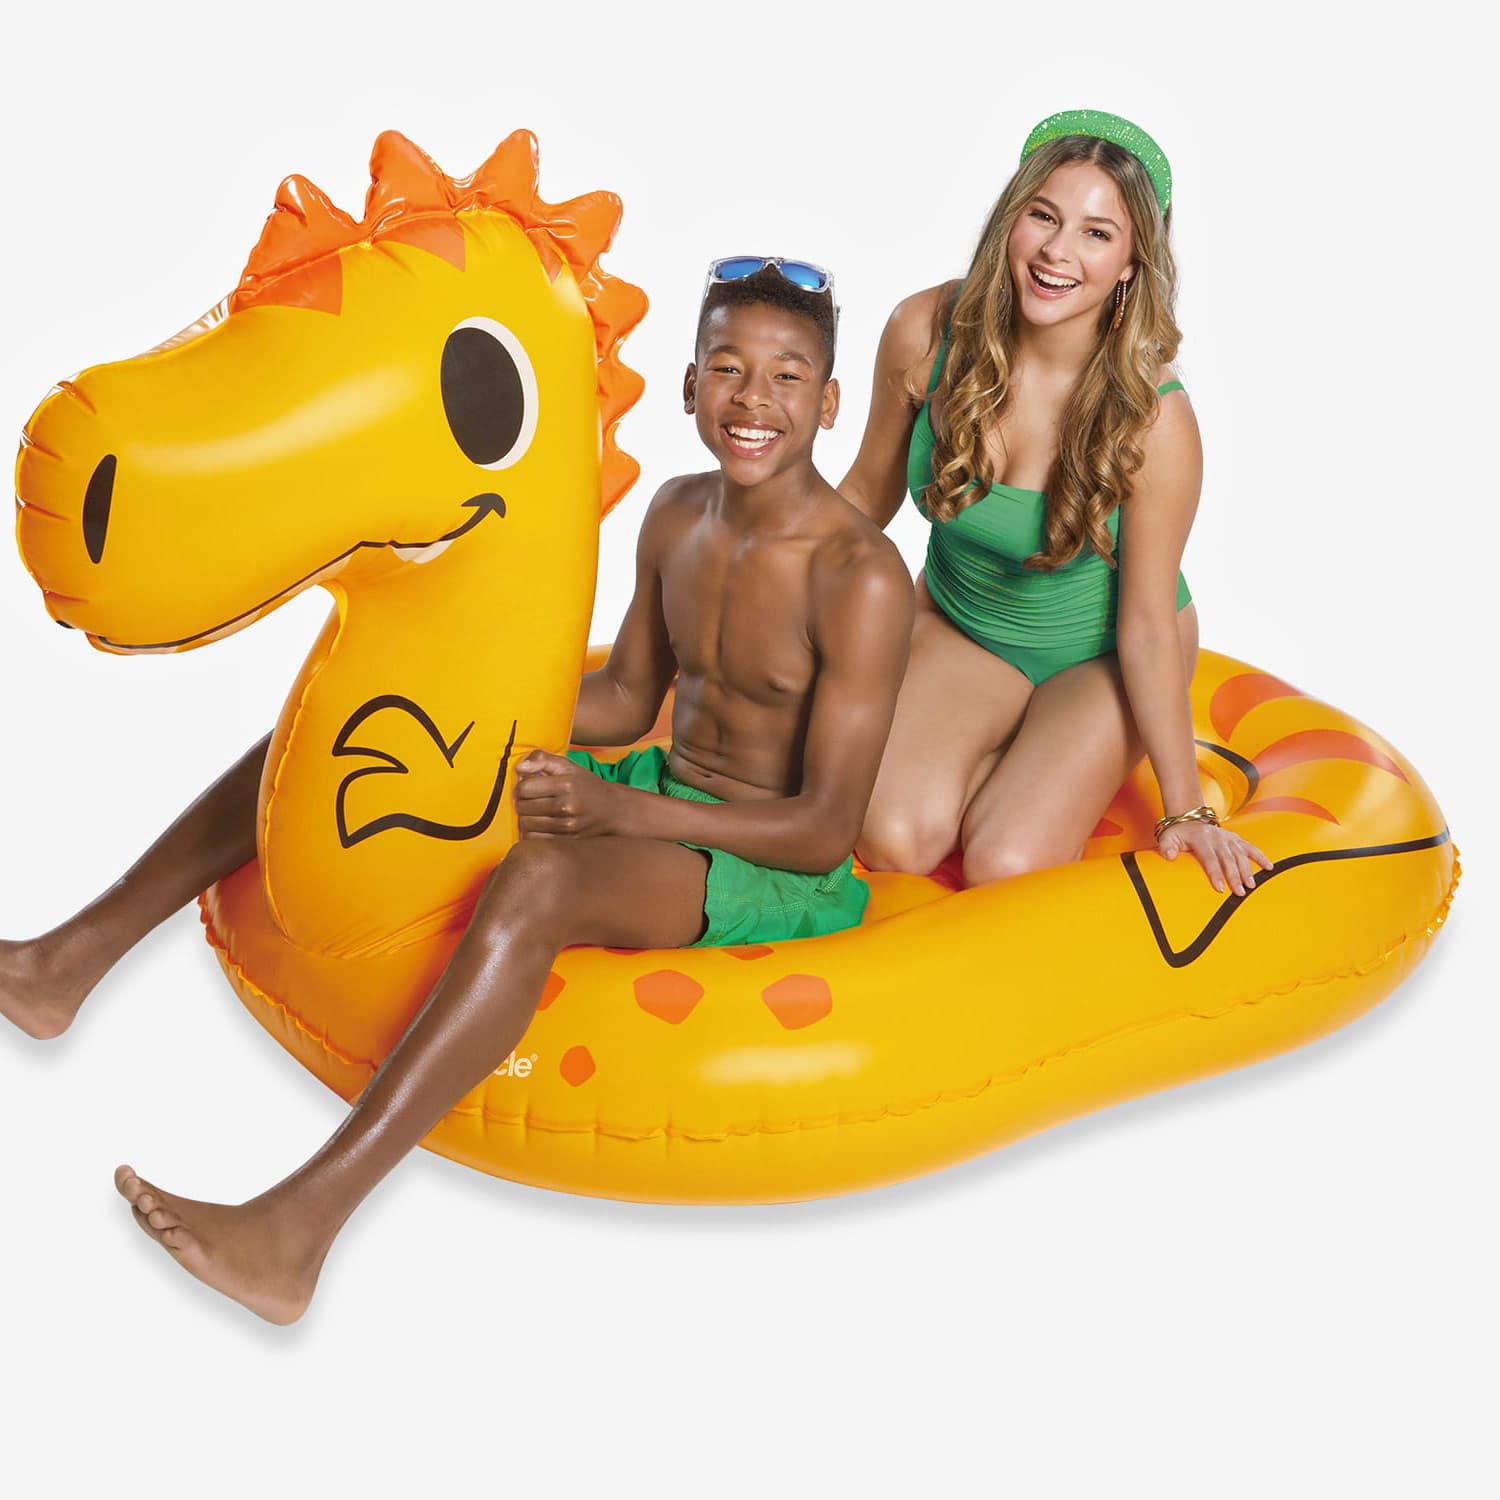 models riding Funsicle DINOmite Ride-On